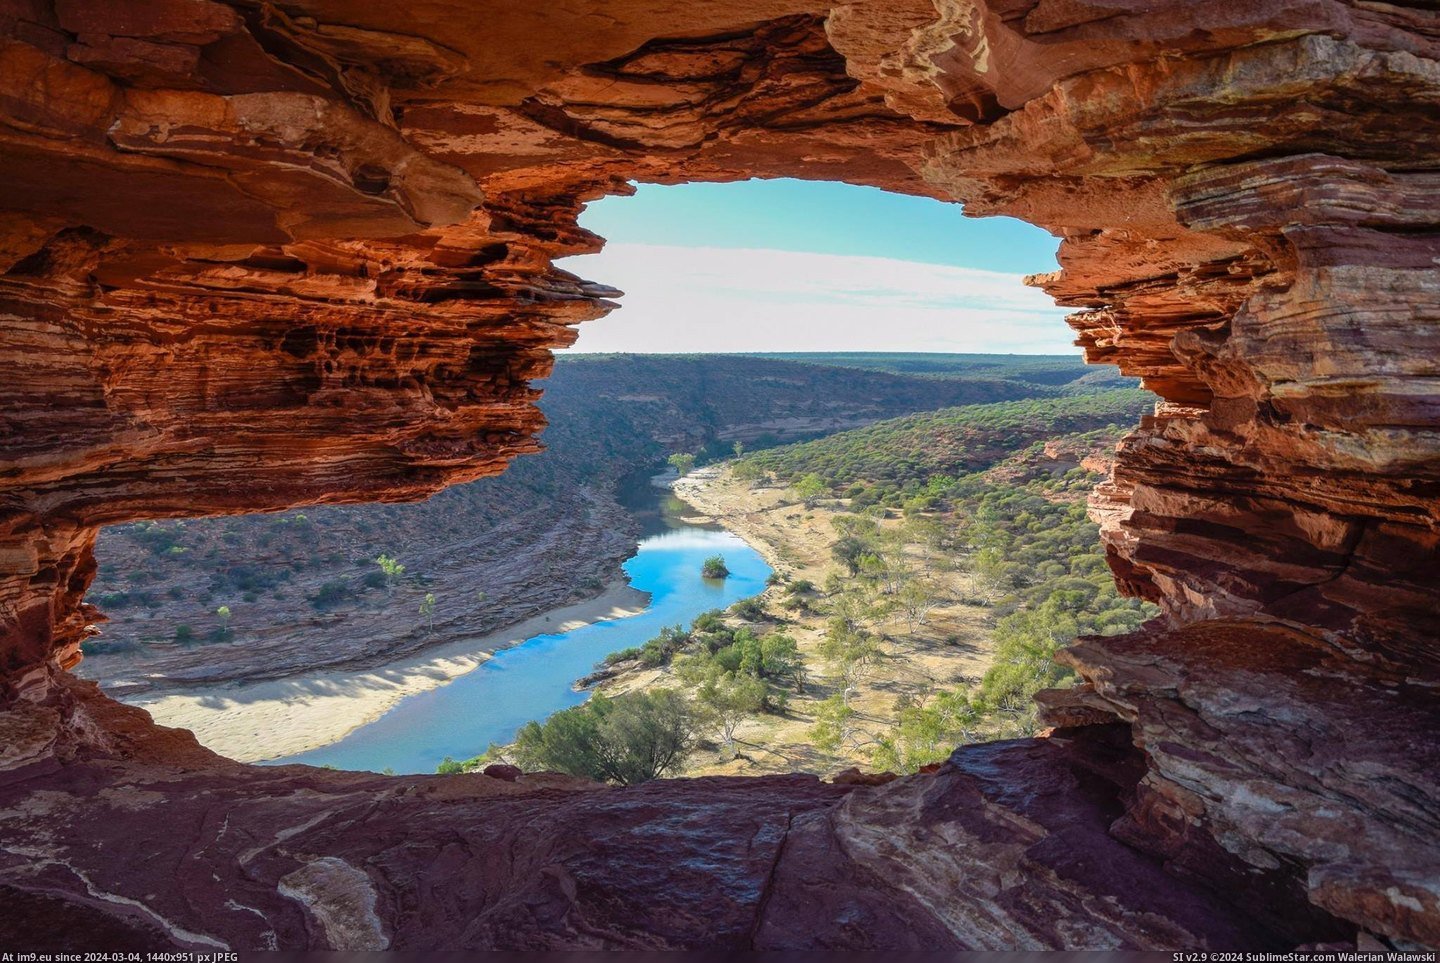 #Nature #Park #National #2048x1365 #Wonderland #Ramon #Window #Australia #West [Earthporn] The window to the nature's wonderland...Ramon Bieri, Kalbarri National Park, West AUstralia [2048x1365] Pic. (Image of album My r/EARTHPORN favs))